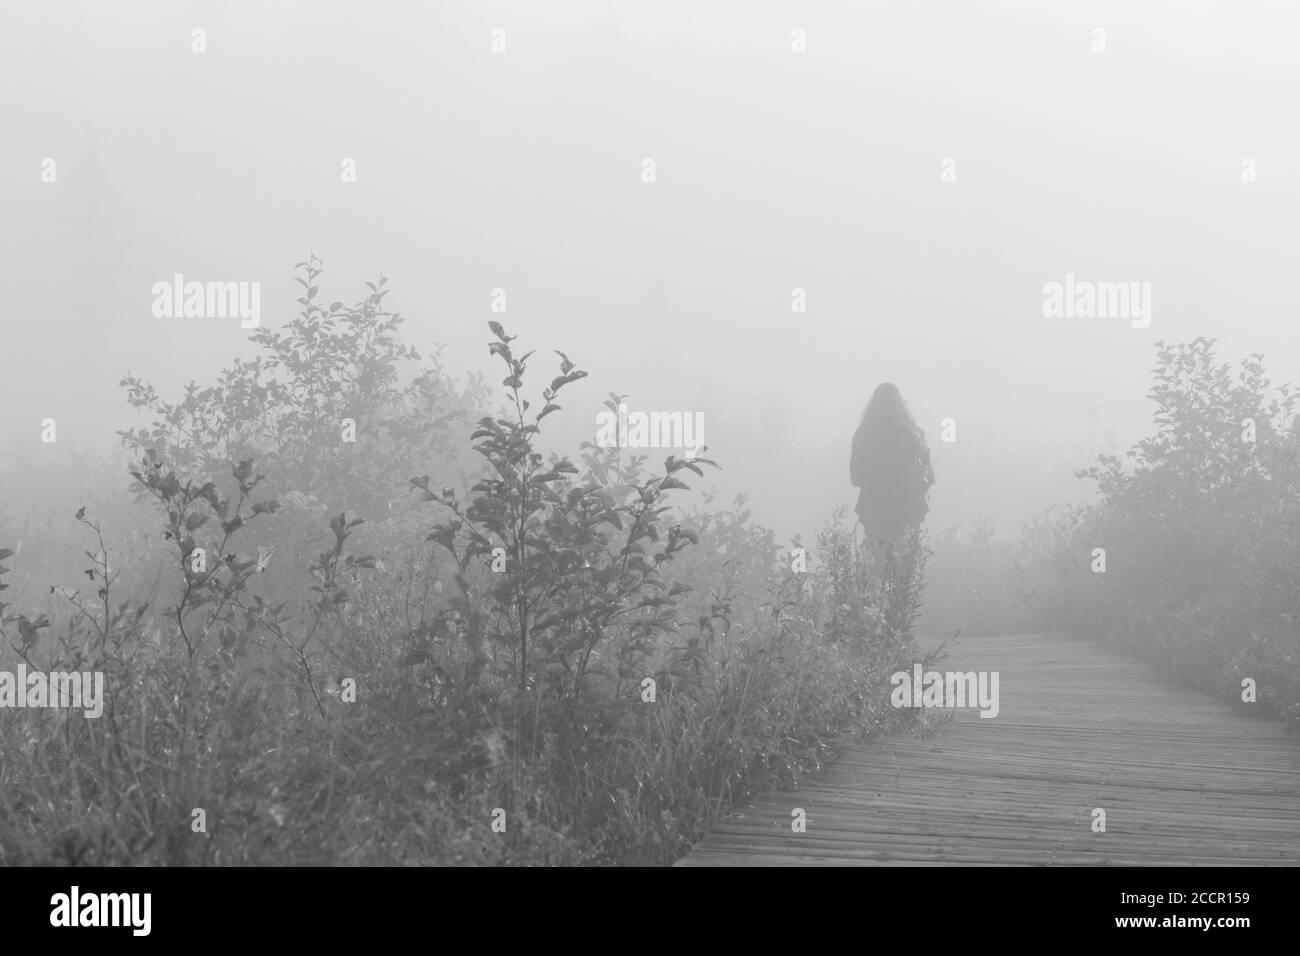 Silhouette of person walking on wooden boardwalk through early morning mist in outdoors scenery monochrome Stock Photo